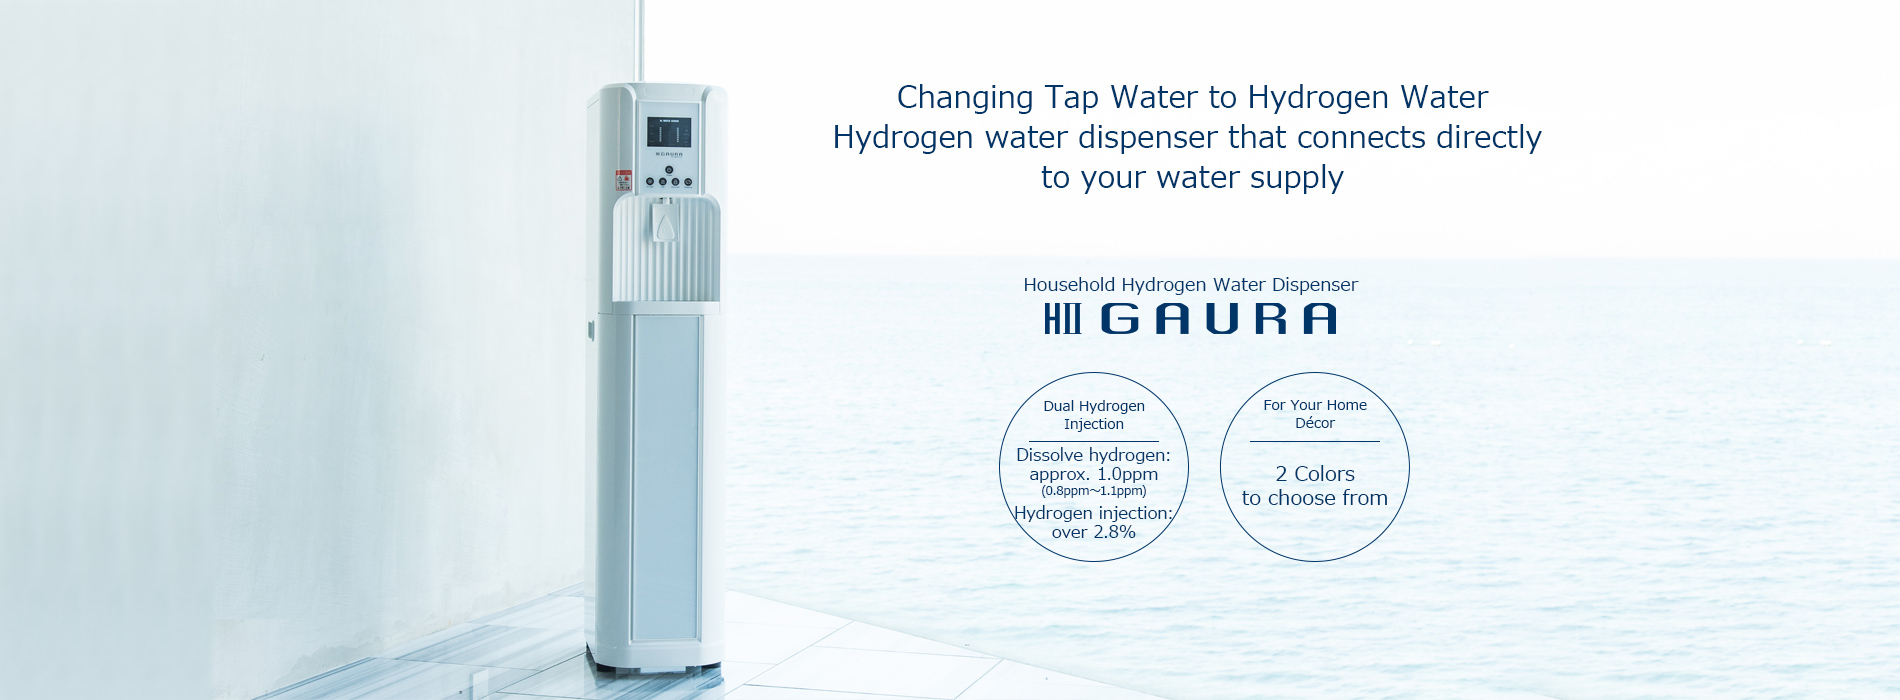 Household Hydrogen Water Dispenser H II GAURA | hanging Tap Water to Hydrogen Water Hydrogen water dispenser that connects directly to your water supply